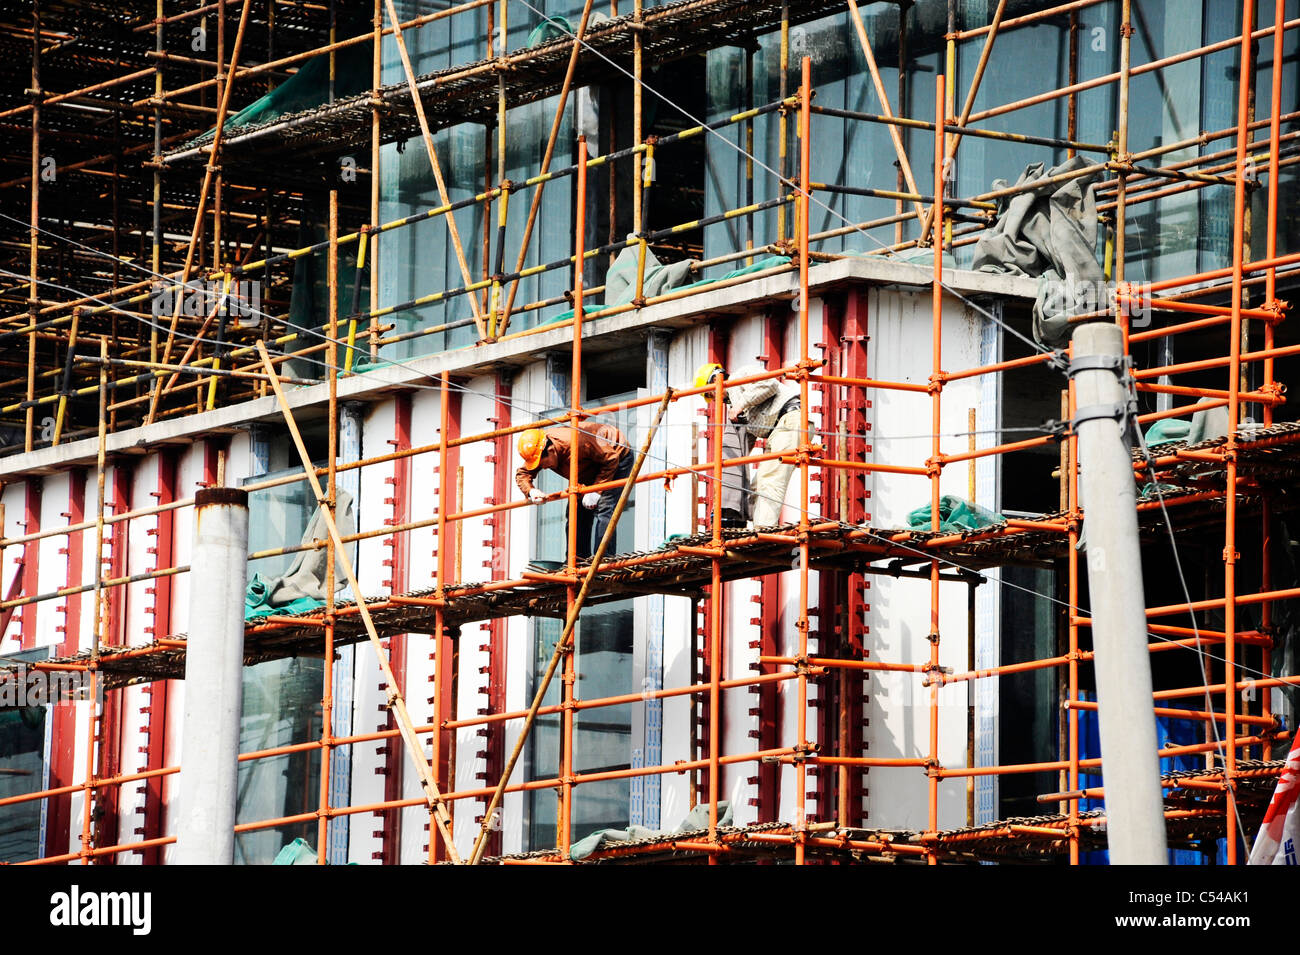 Bamboo scaffolding being used in Shanghai Stock Photo